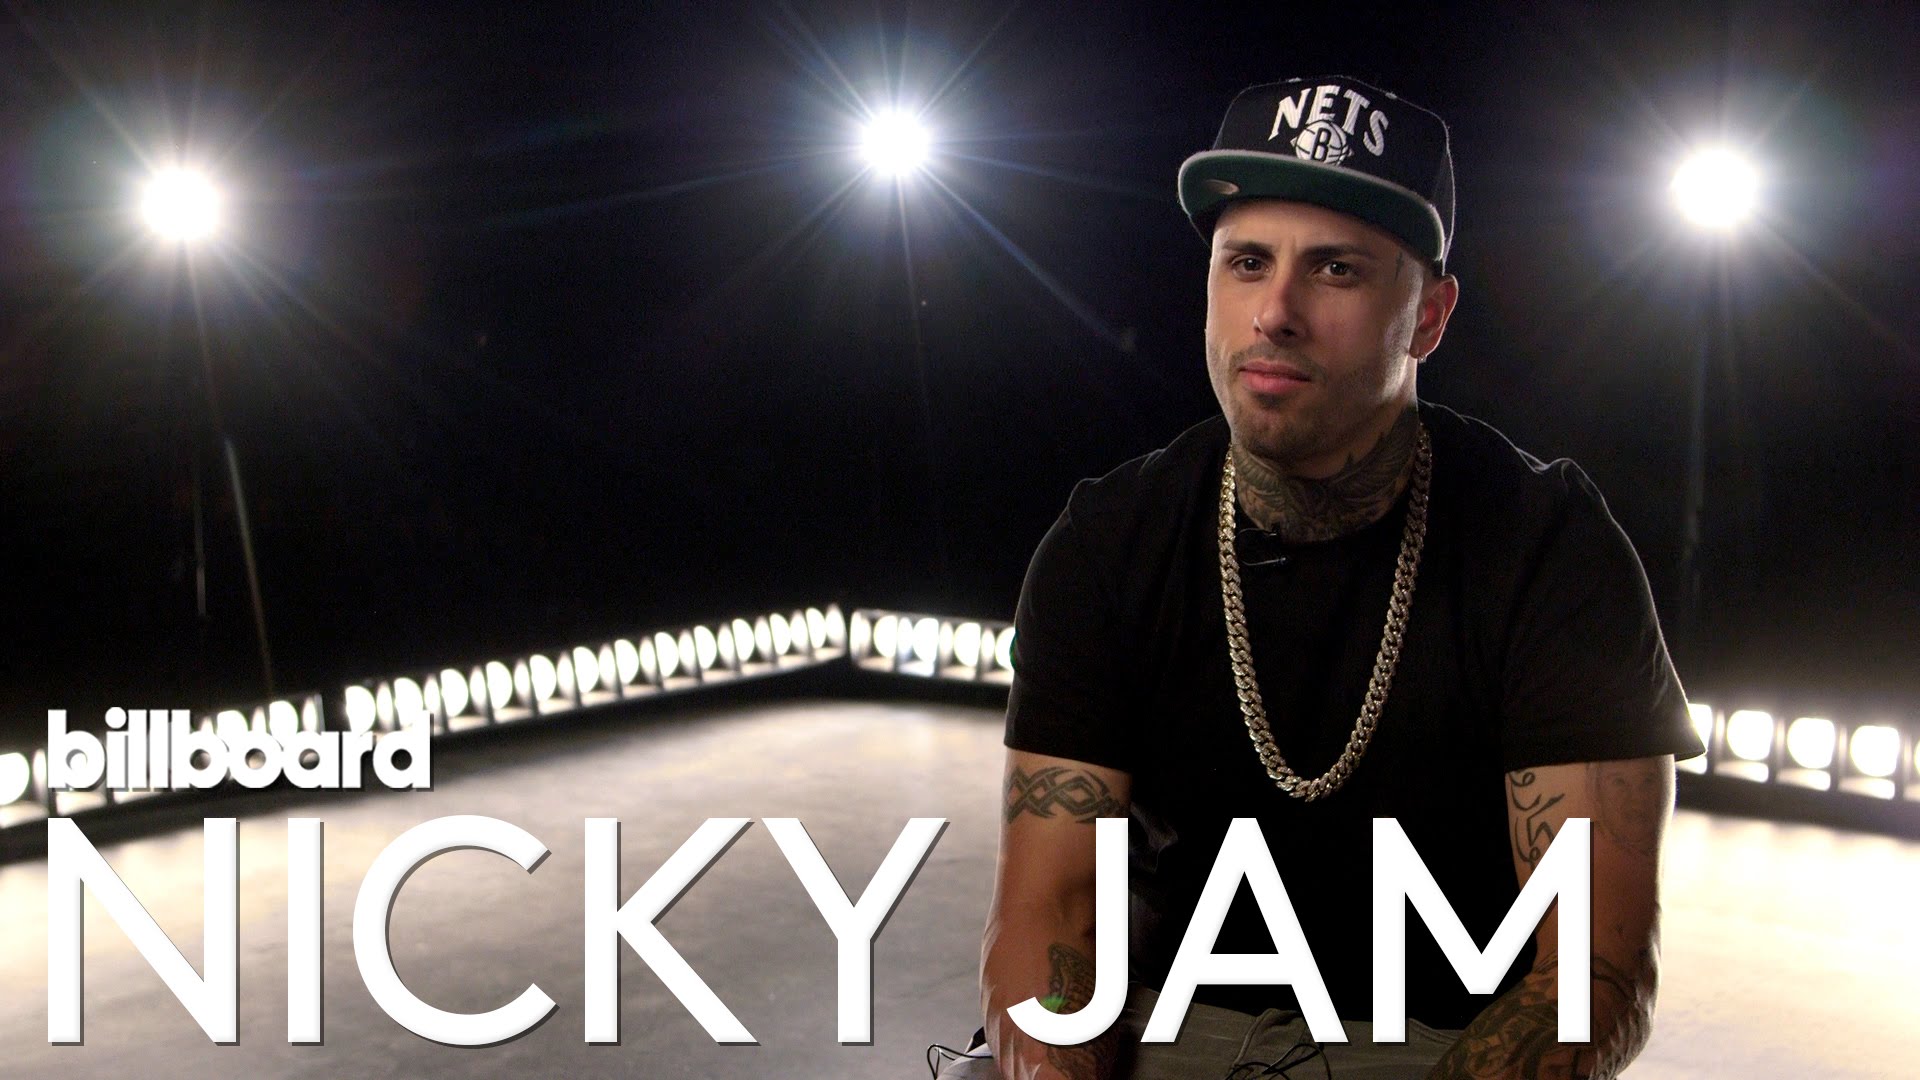 nicky jam wallpaper,font,cool,photography,photo caption,music